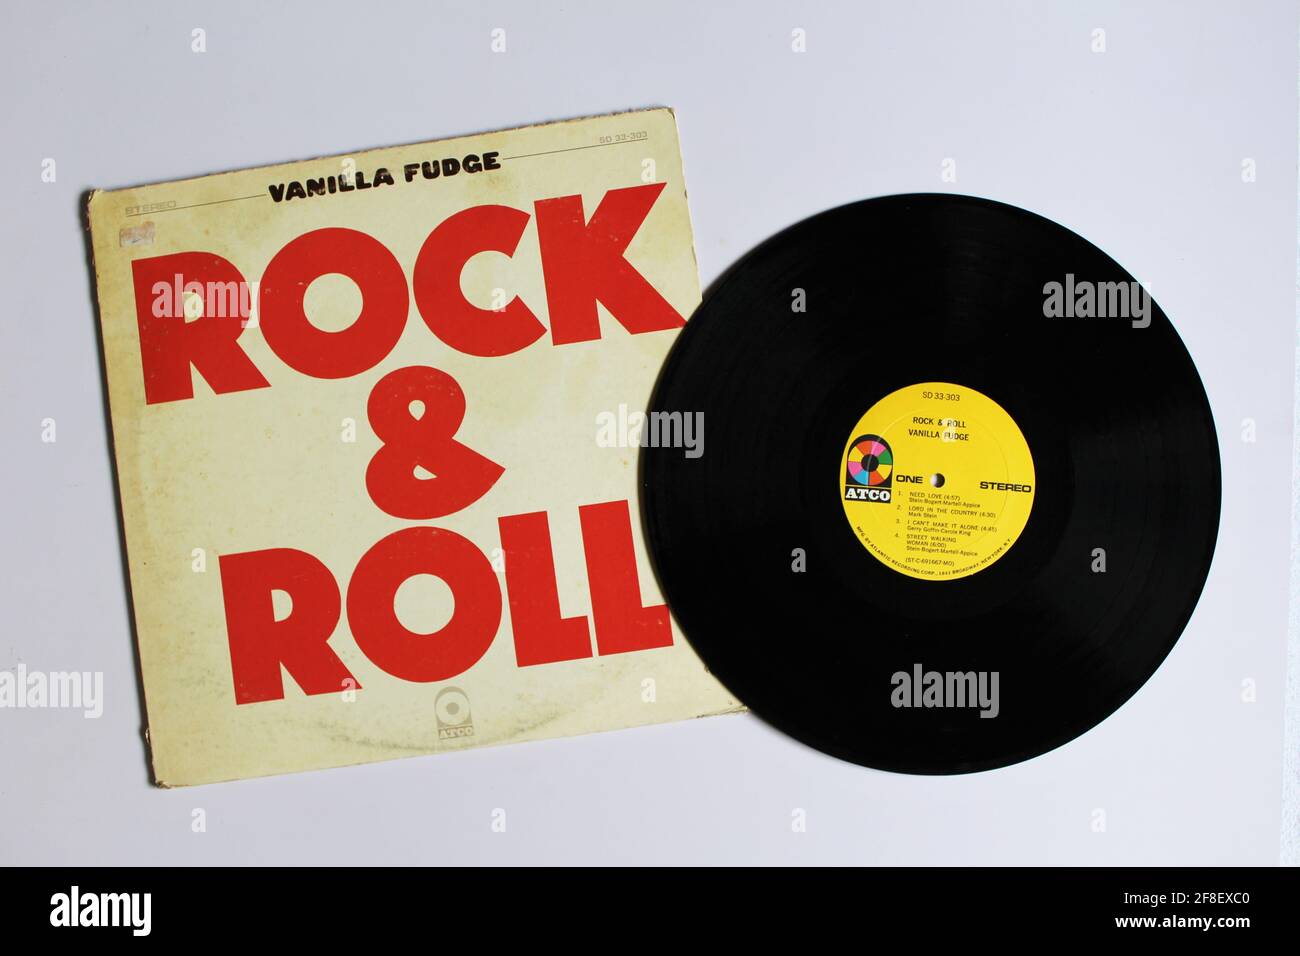 American hard rock and psychedelic rock band Vanilla Fudge music album on vinyl record LP disc. Titled: Rock and Roll Stock Photo